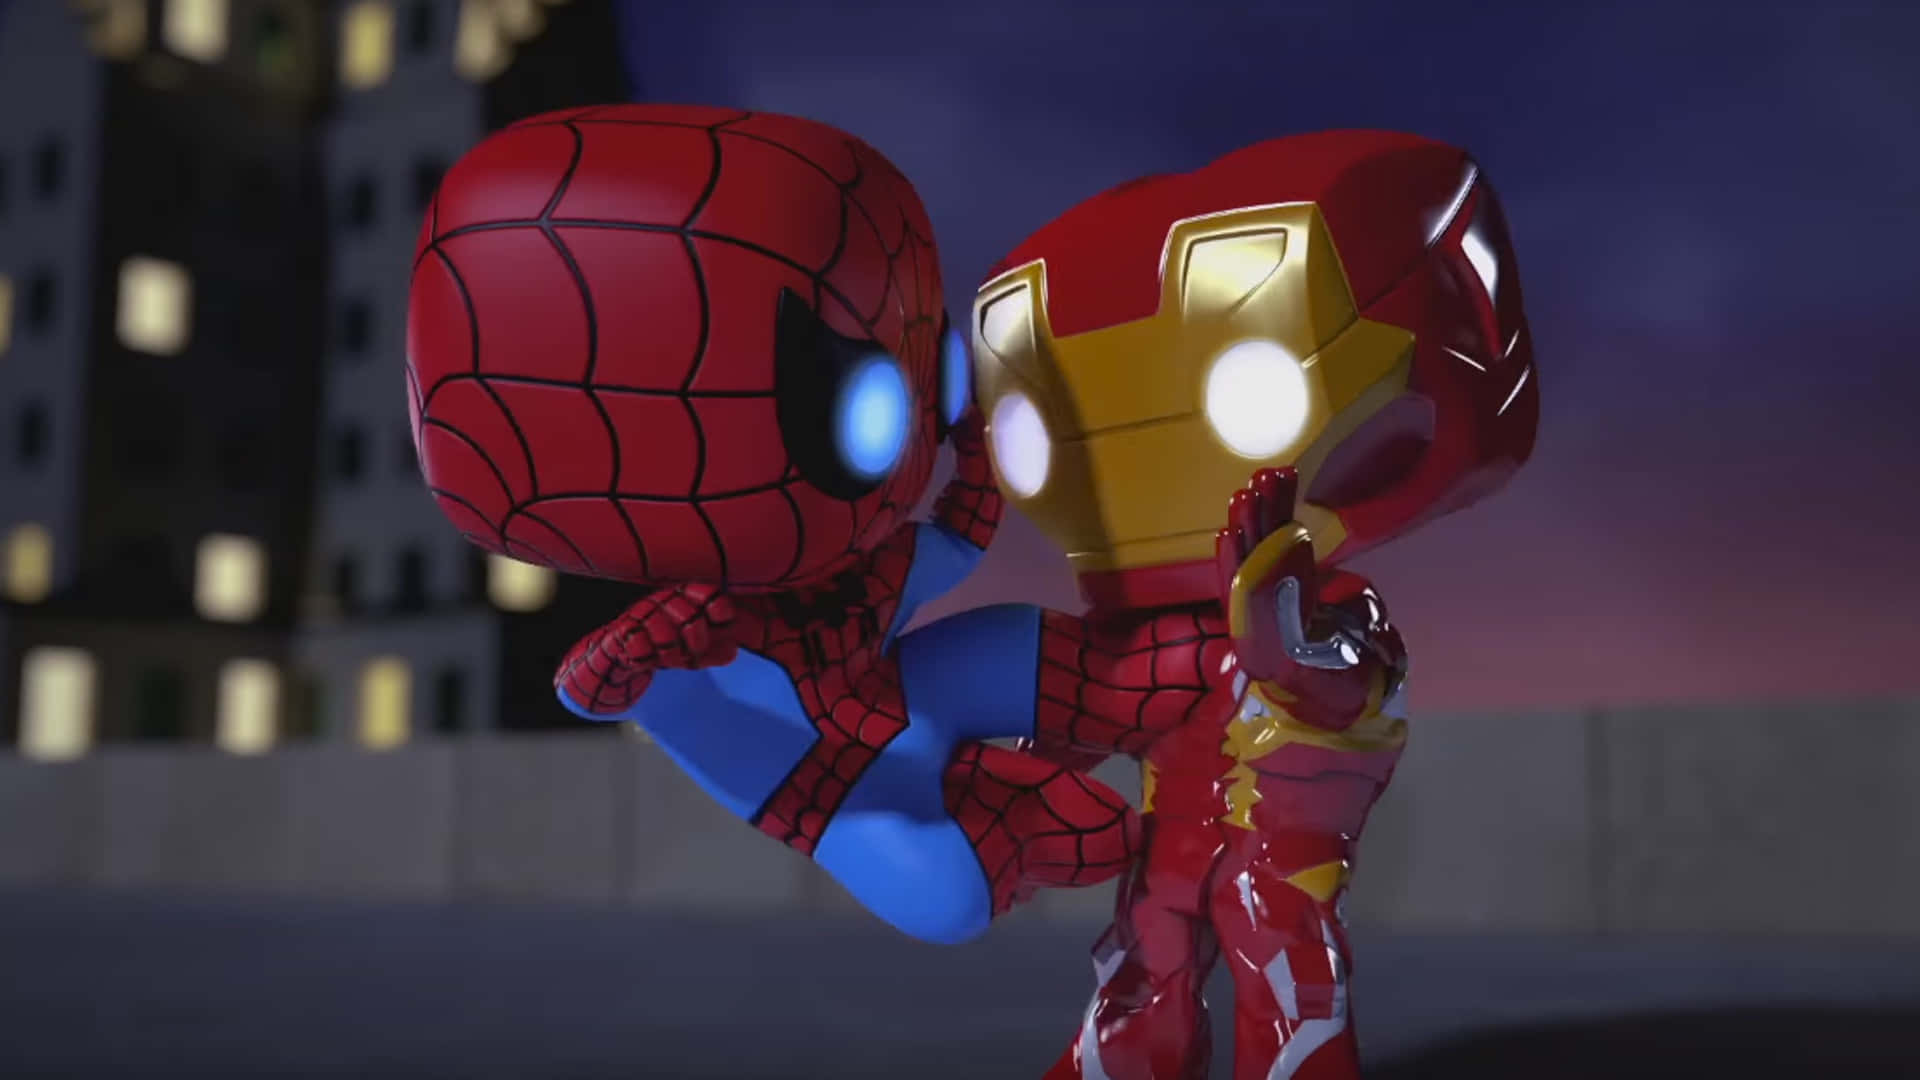 Collect your favourite Marvel superhero in Iron Man Pop Figures! Wallpaper